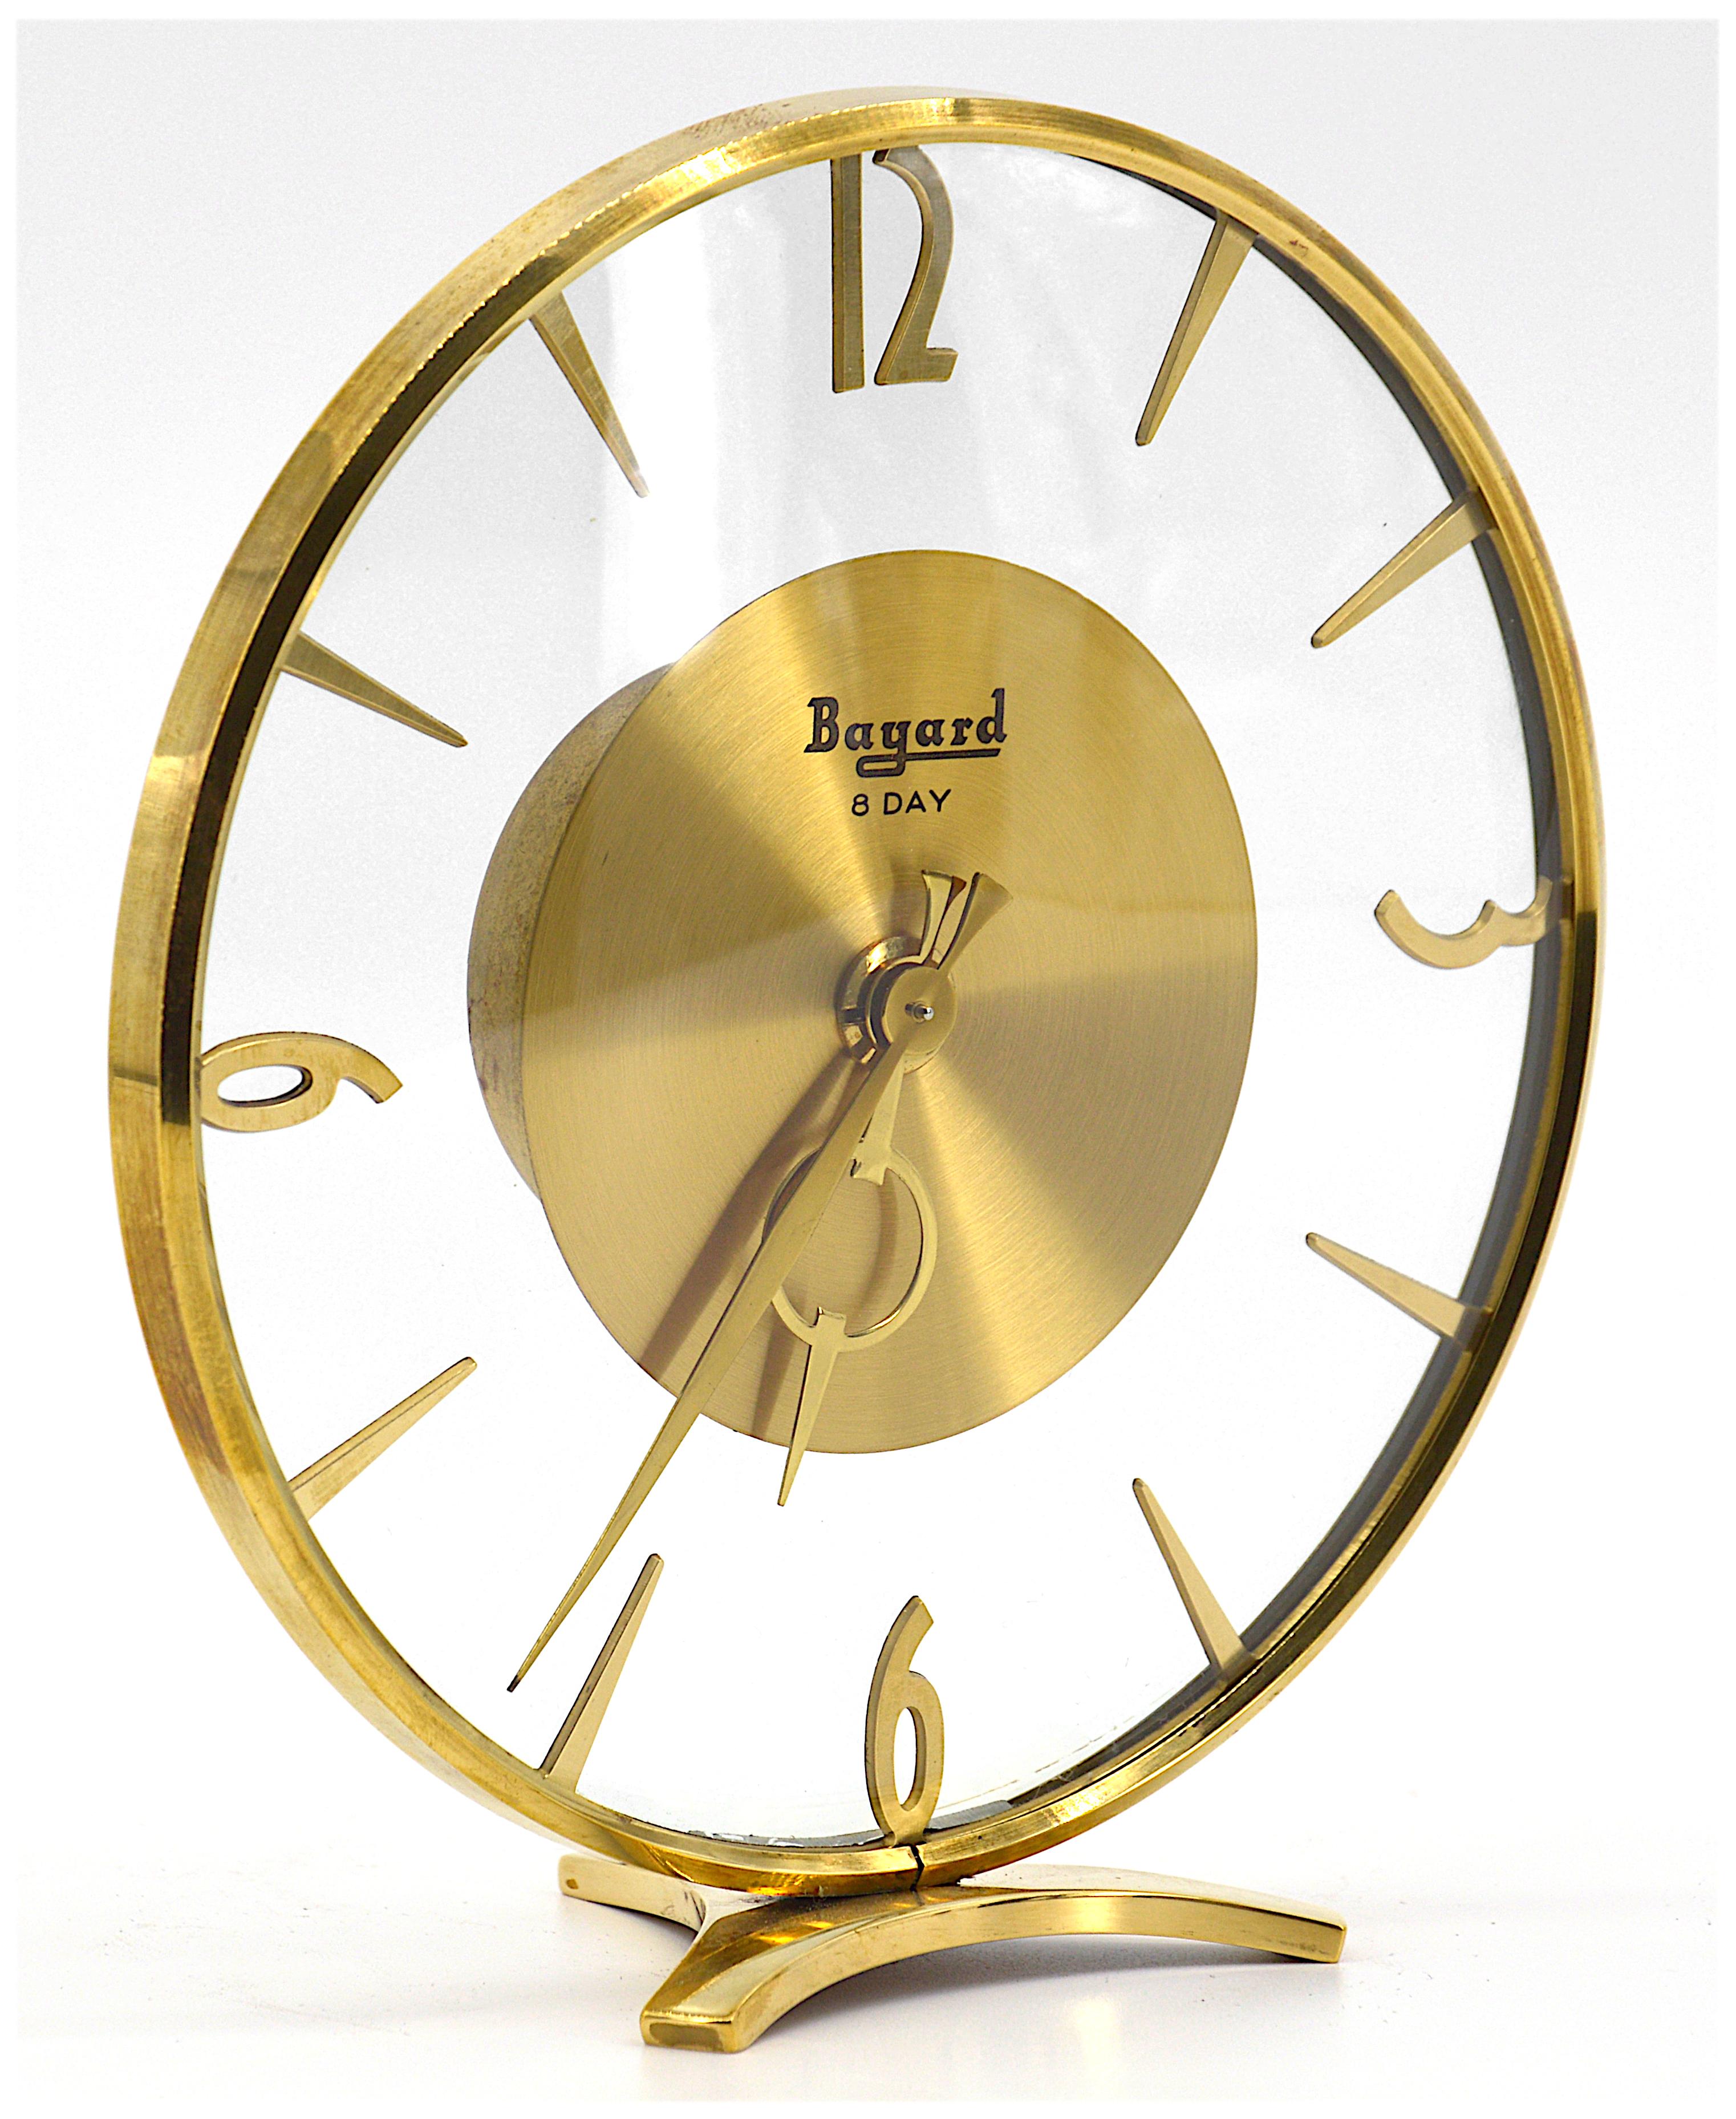 Art Deco table clock by Bayard, France, 1930s. Brass and glass. 8 days movement. Height 6.7